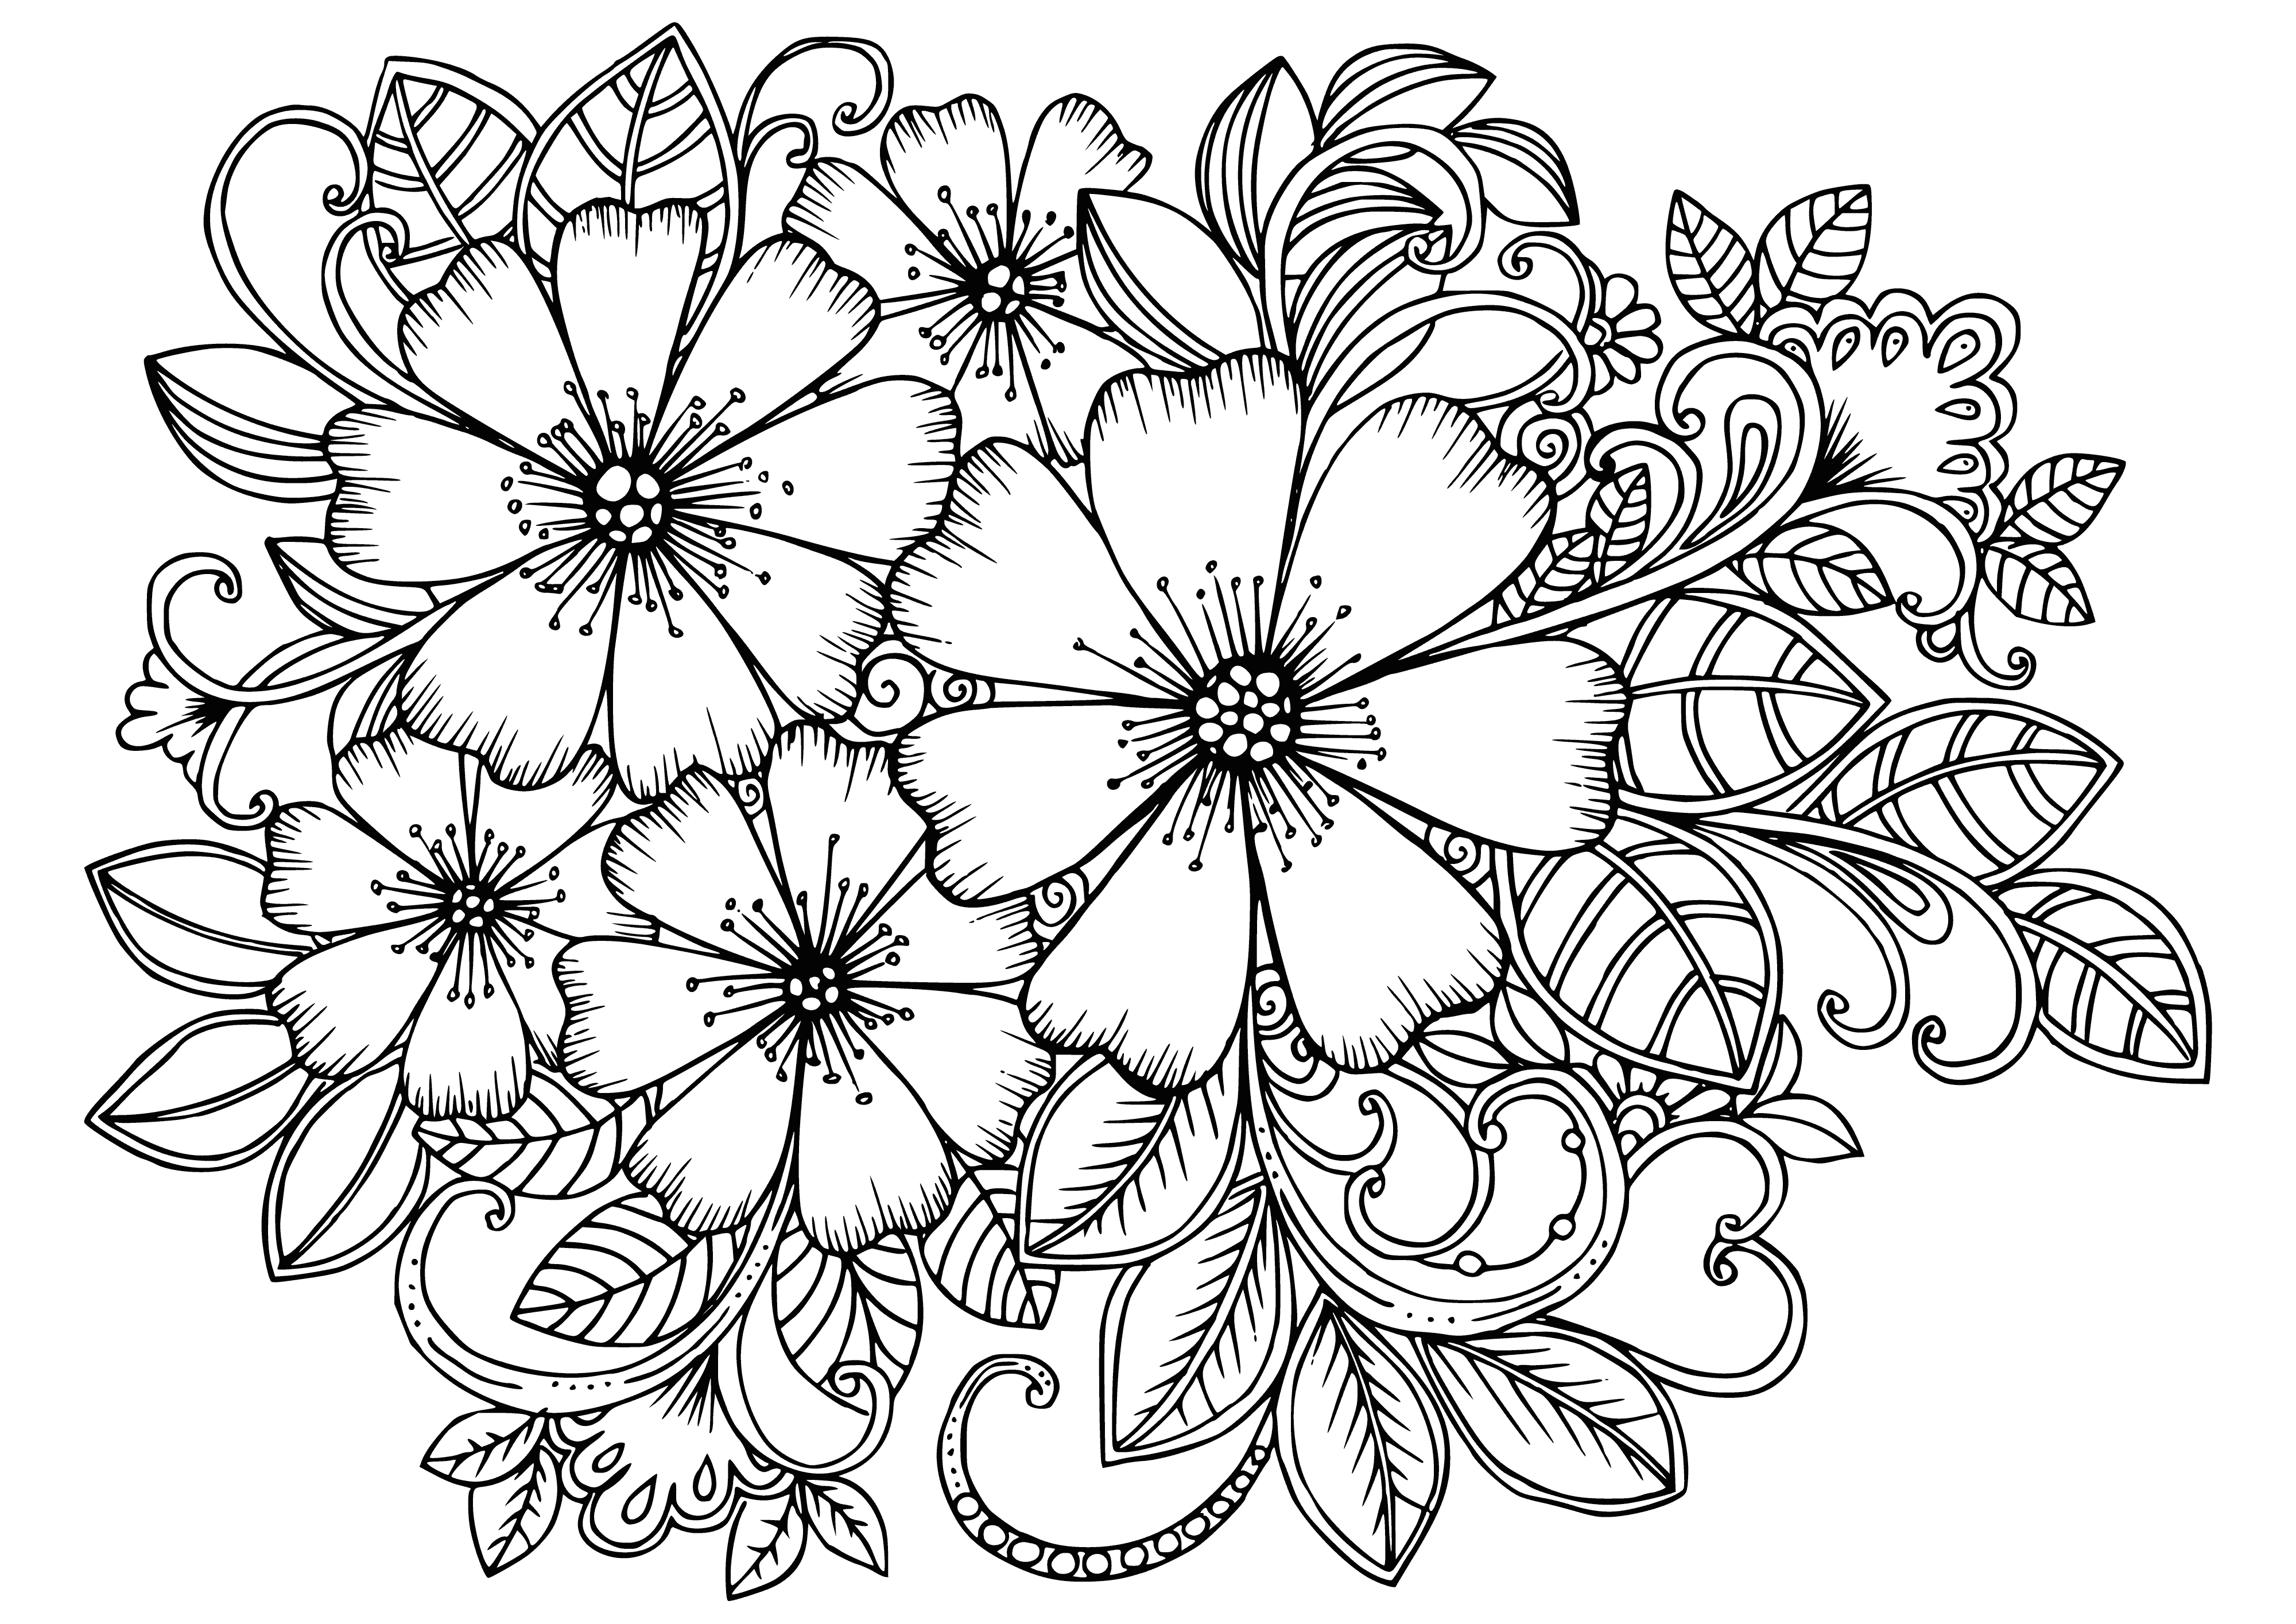 coloring page: Flowers of various colors and types, some falling off and some full bloom, with leaves and vines too. #adultcoloring